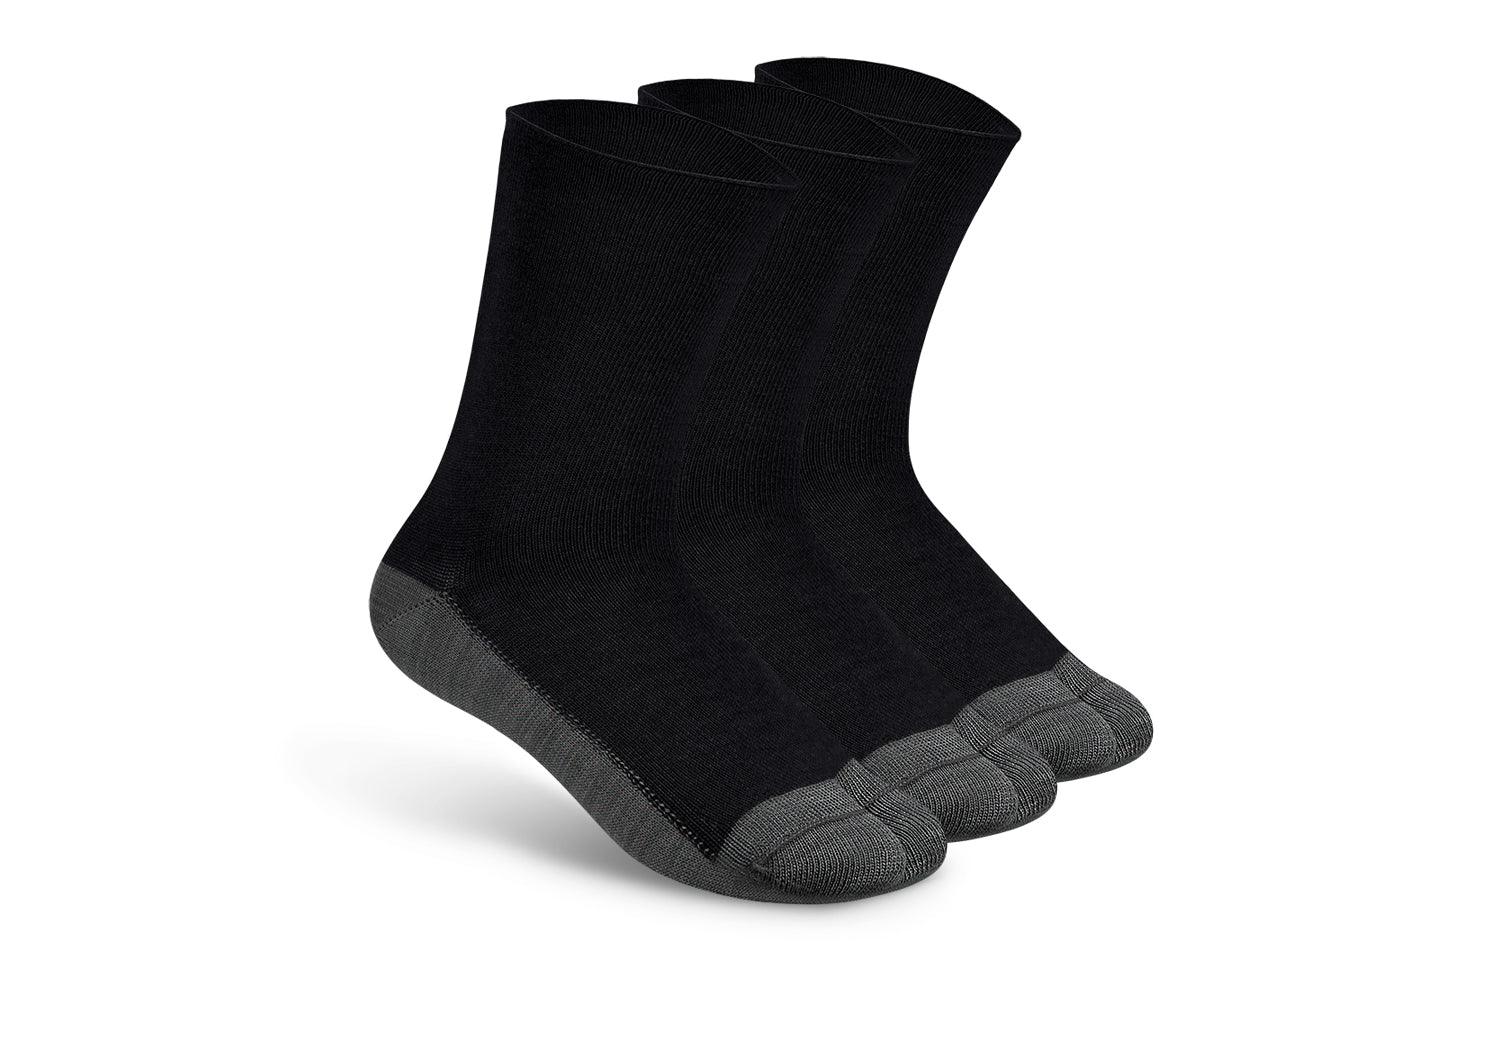 Of Mens Cotton Thumb Socks Large Size, Thick, Five Finger Design In Solid  Black Color Calcetines Ortopedicos From Daboluomi, $14.06